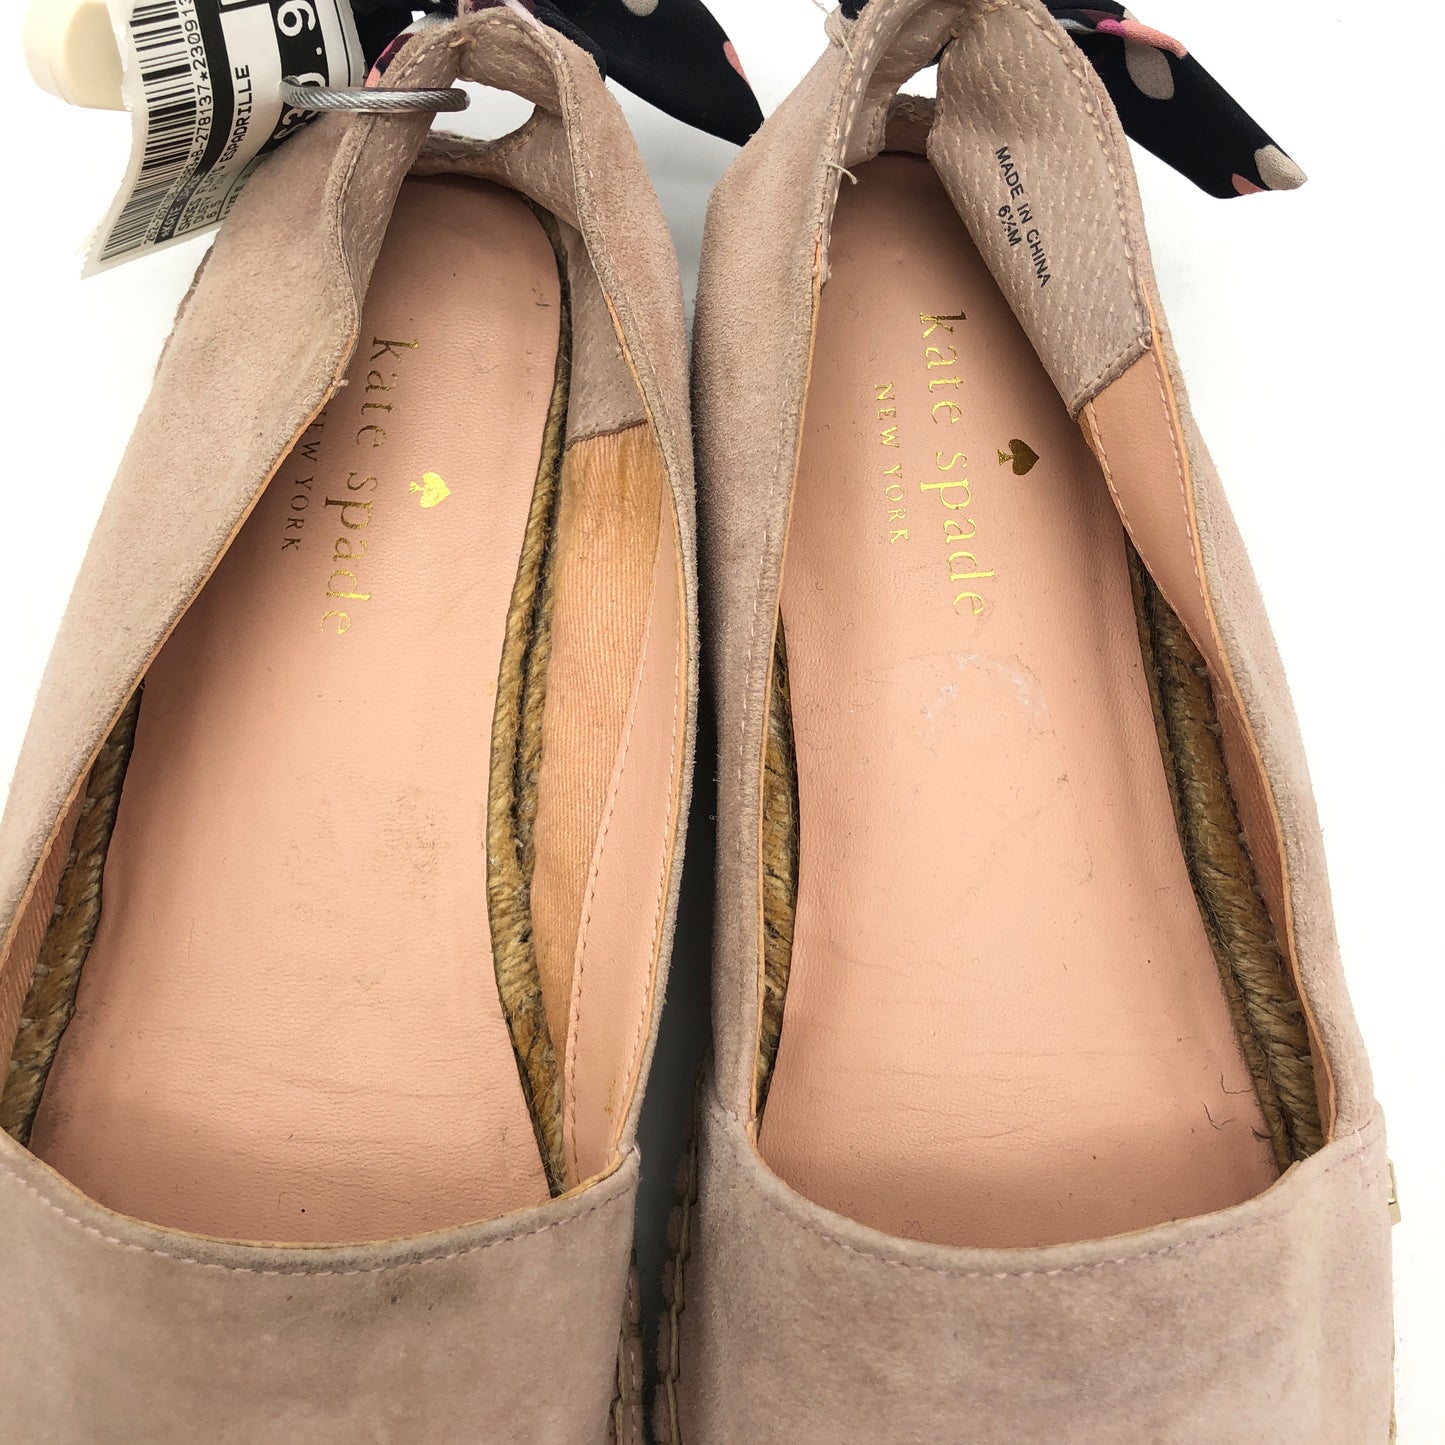 Shoes Flats Espadrille By Kate Spade  Size: 6.5